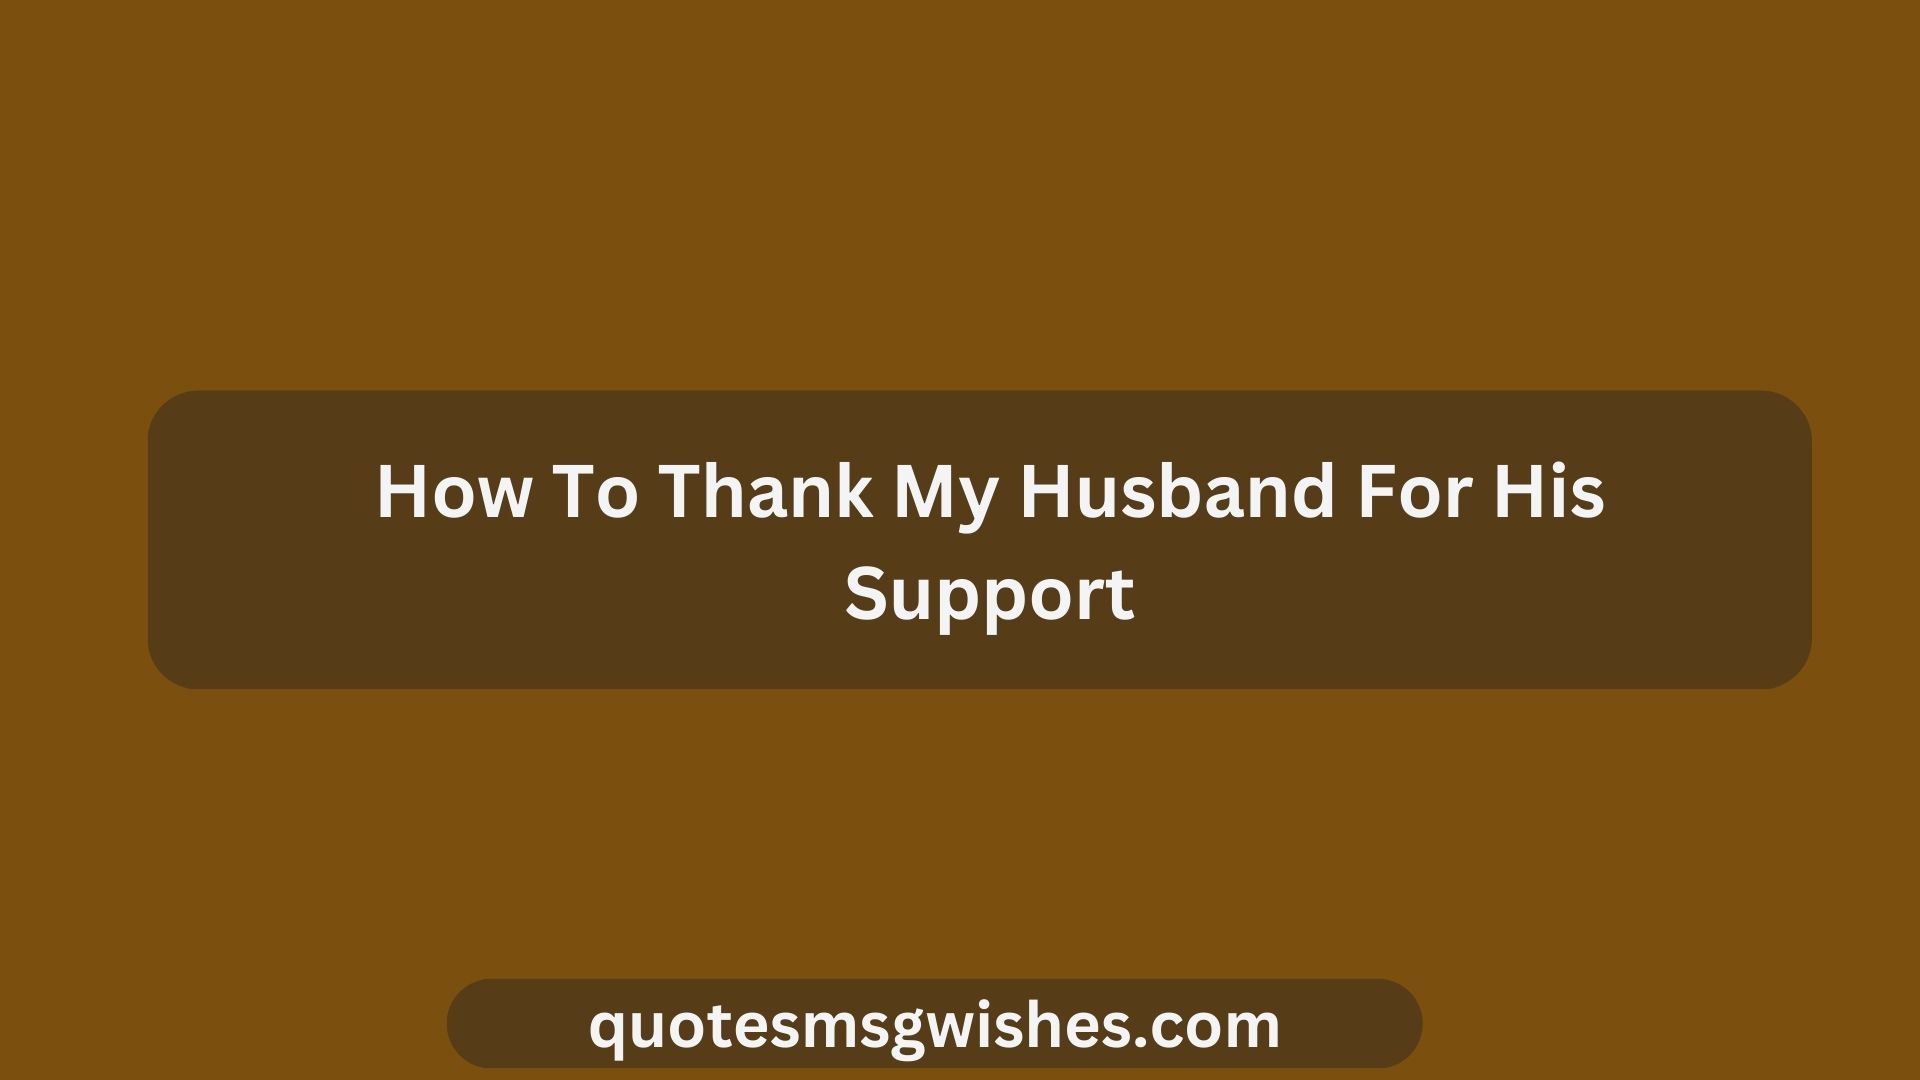 How To Thank My Husband For His Support